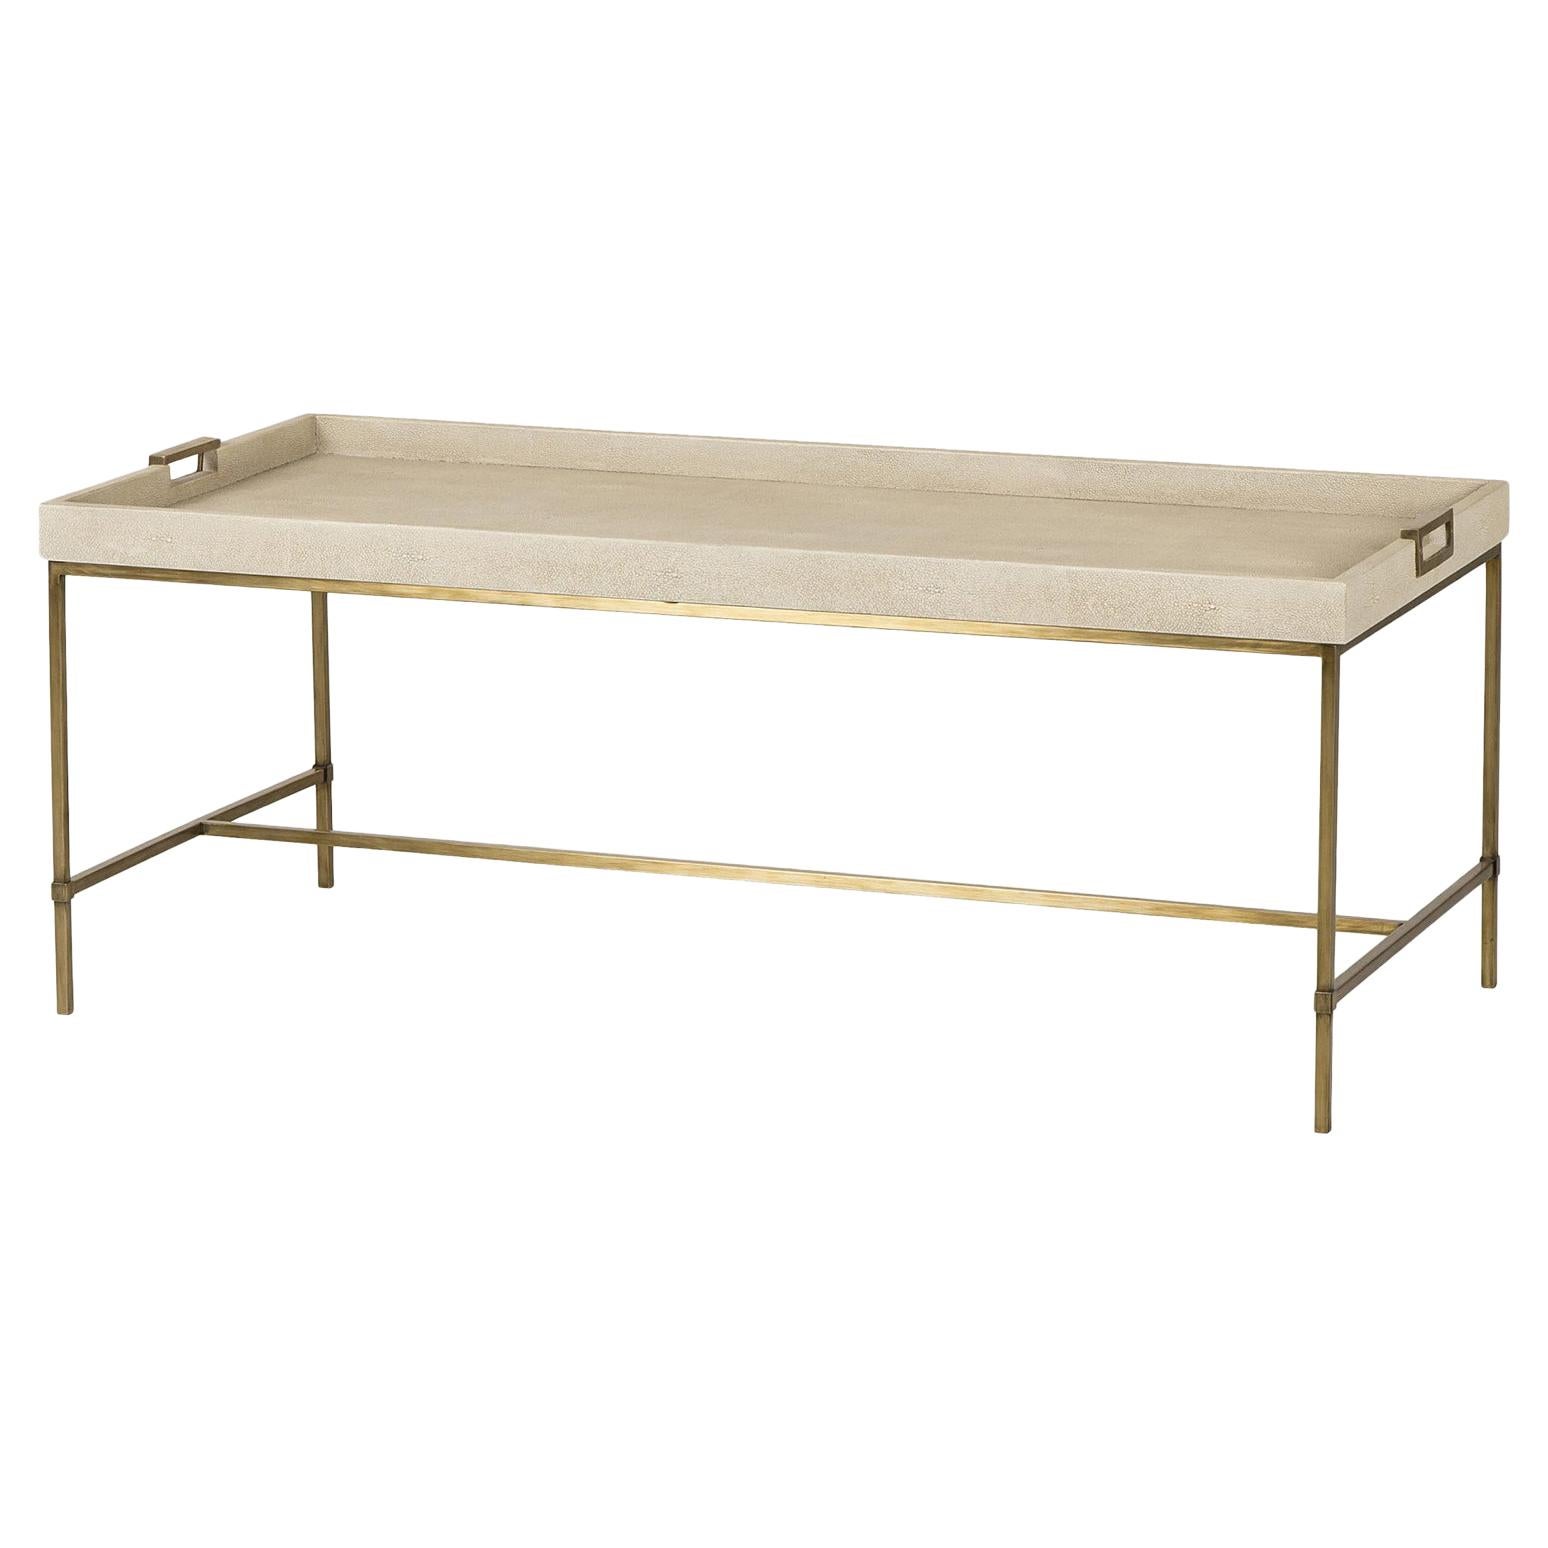 Shagry Cream Coffee Table For Sale